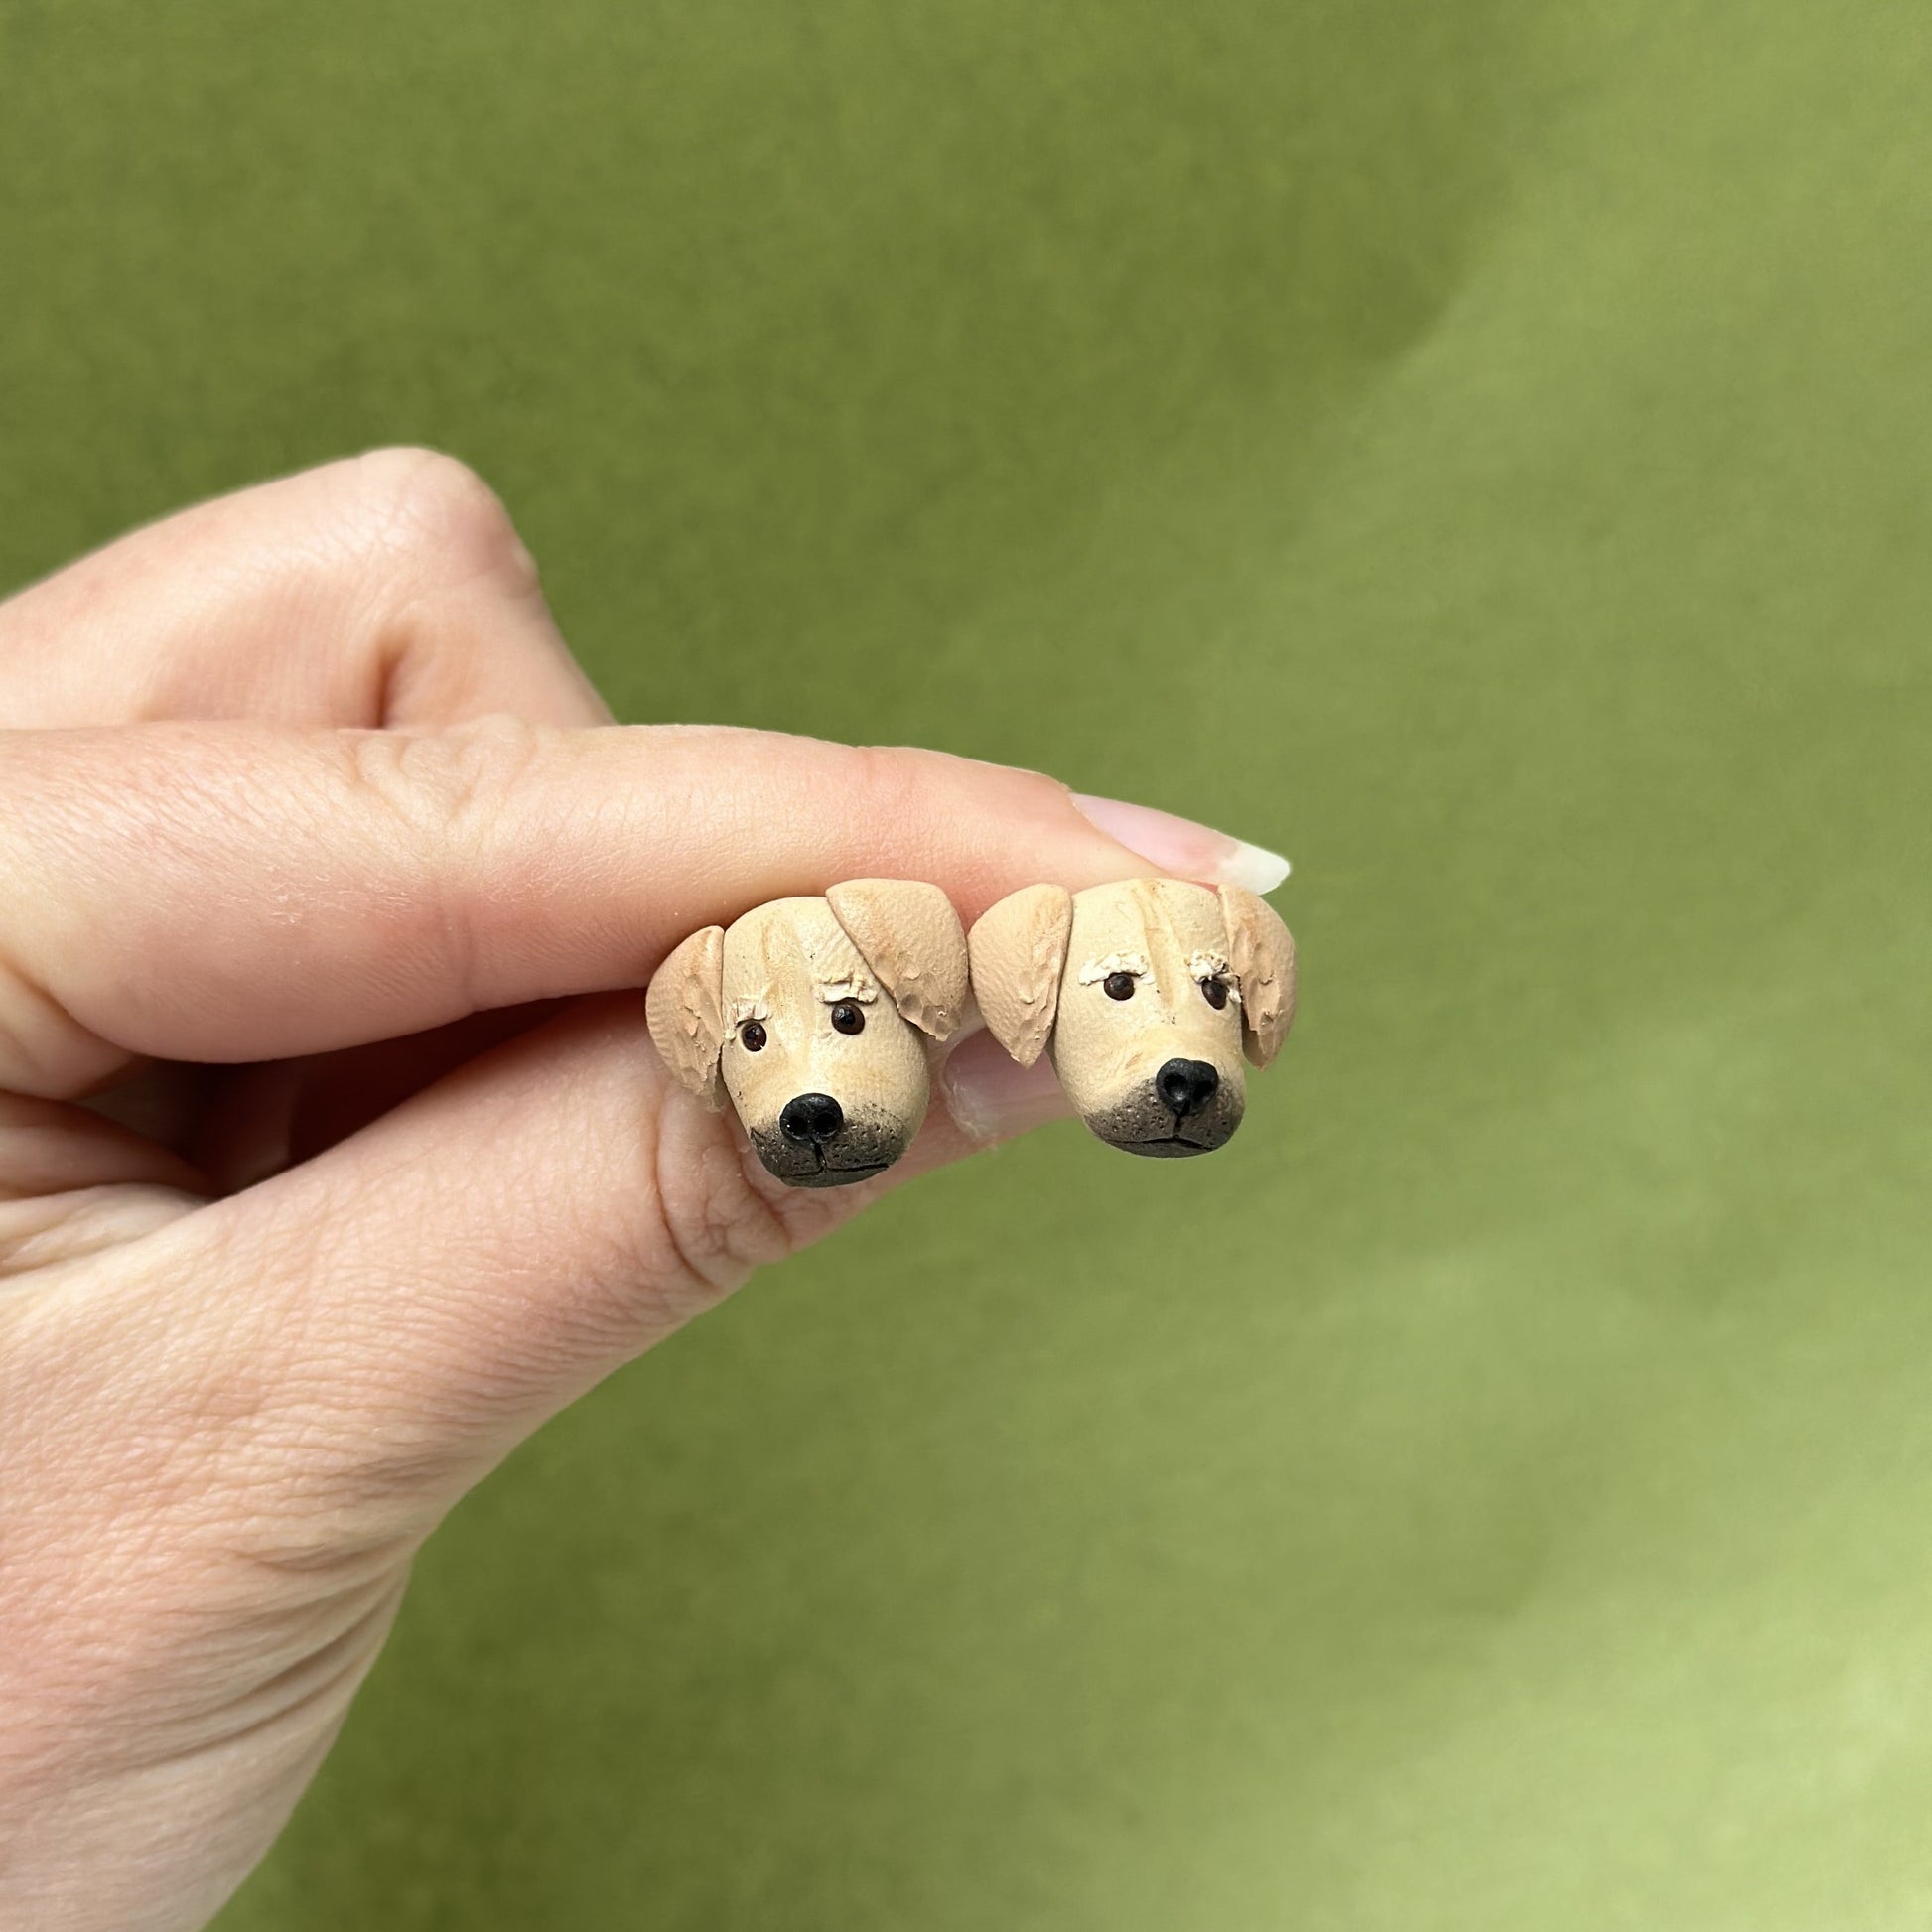 Handmade golden retriever stud earrings by Pawfect Love, positioned in front of green background